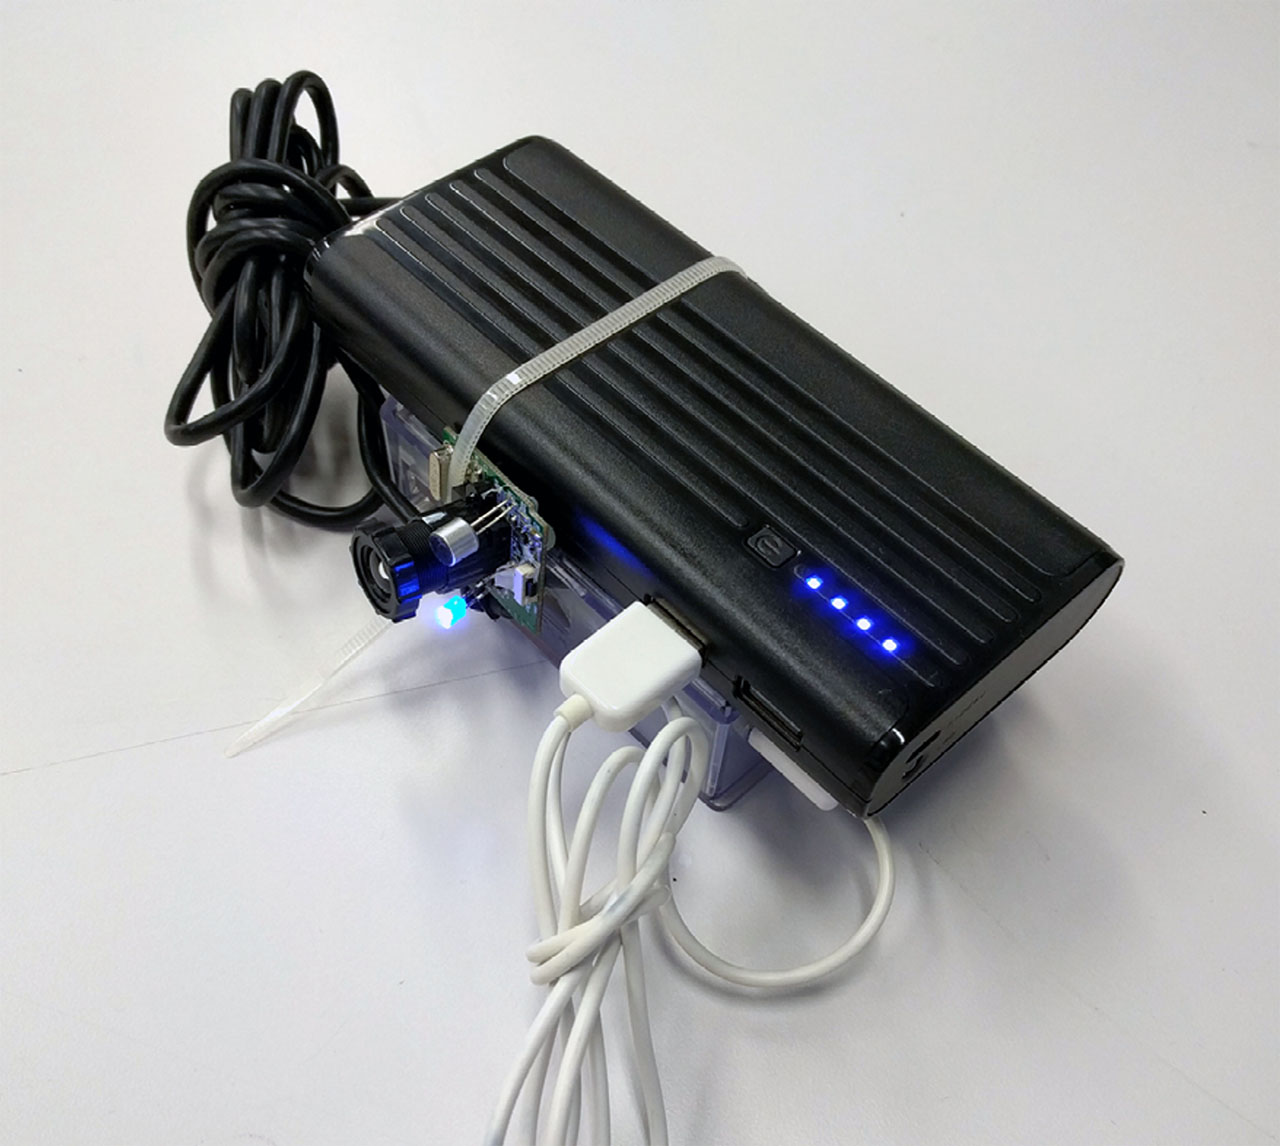 Behavioral prototype made with a battery pack and a Raspberry Pi